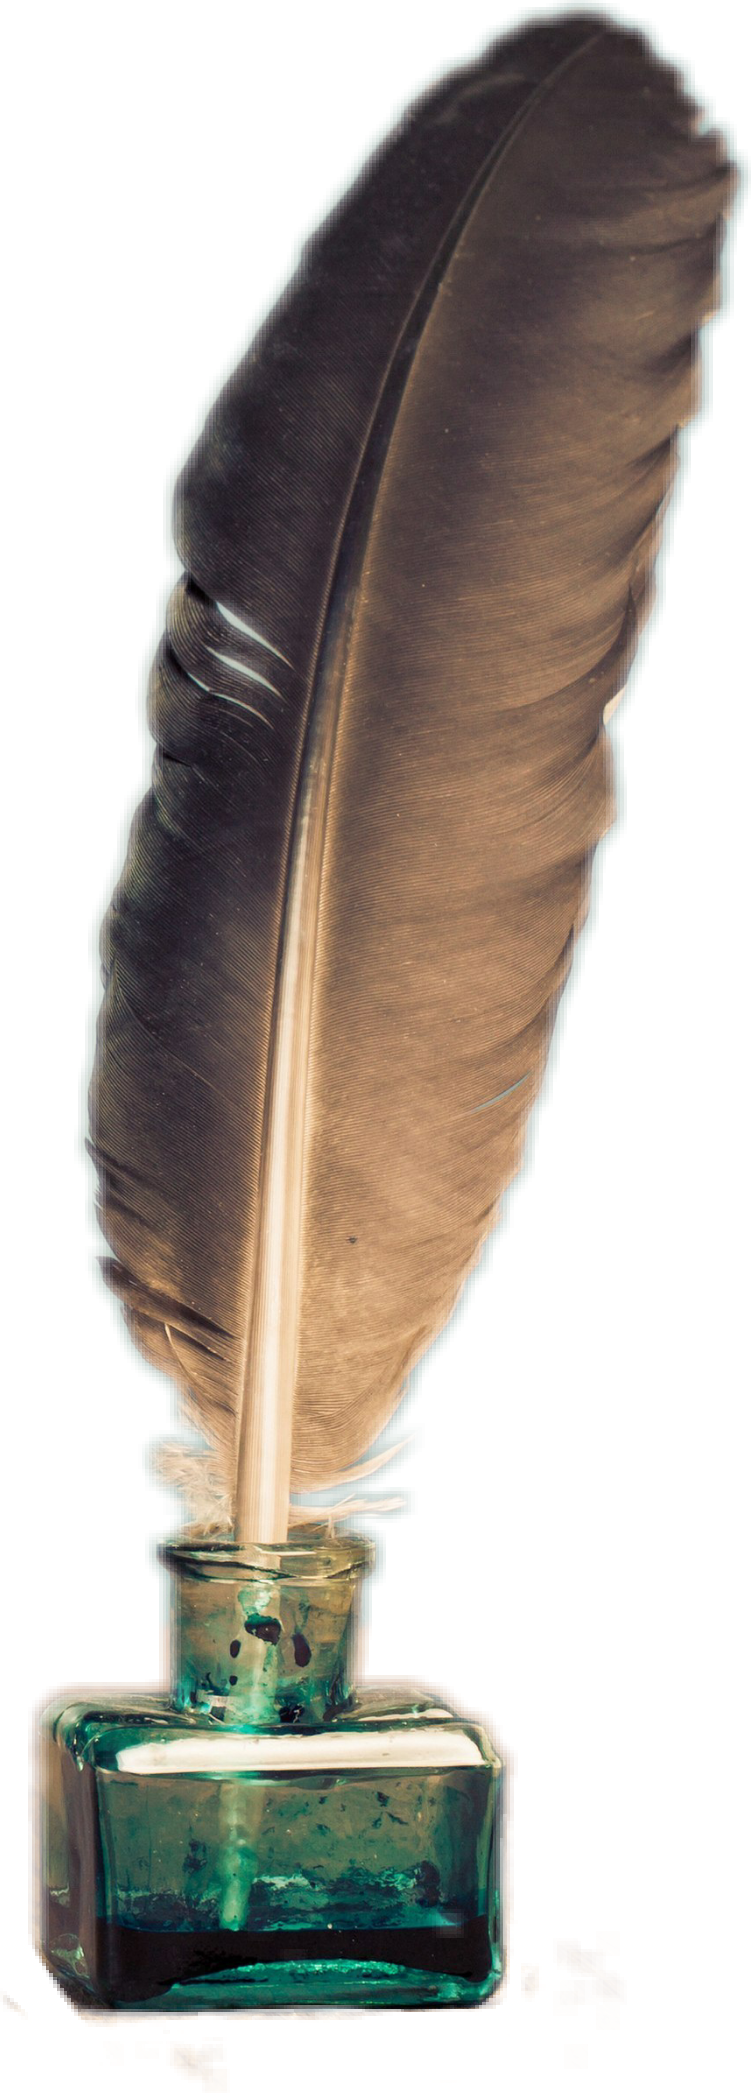 A Close Up Of A Feather